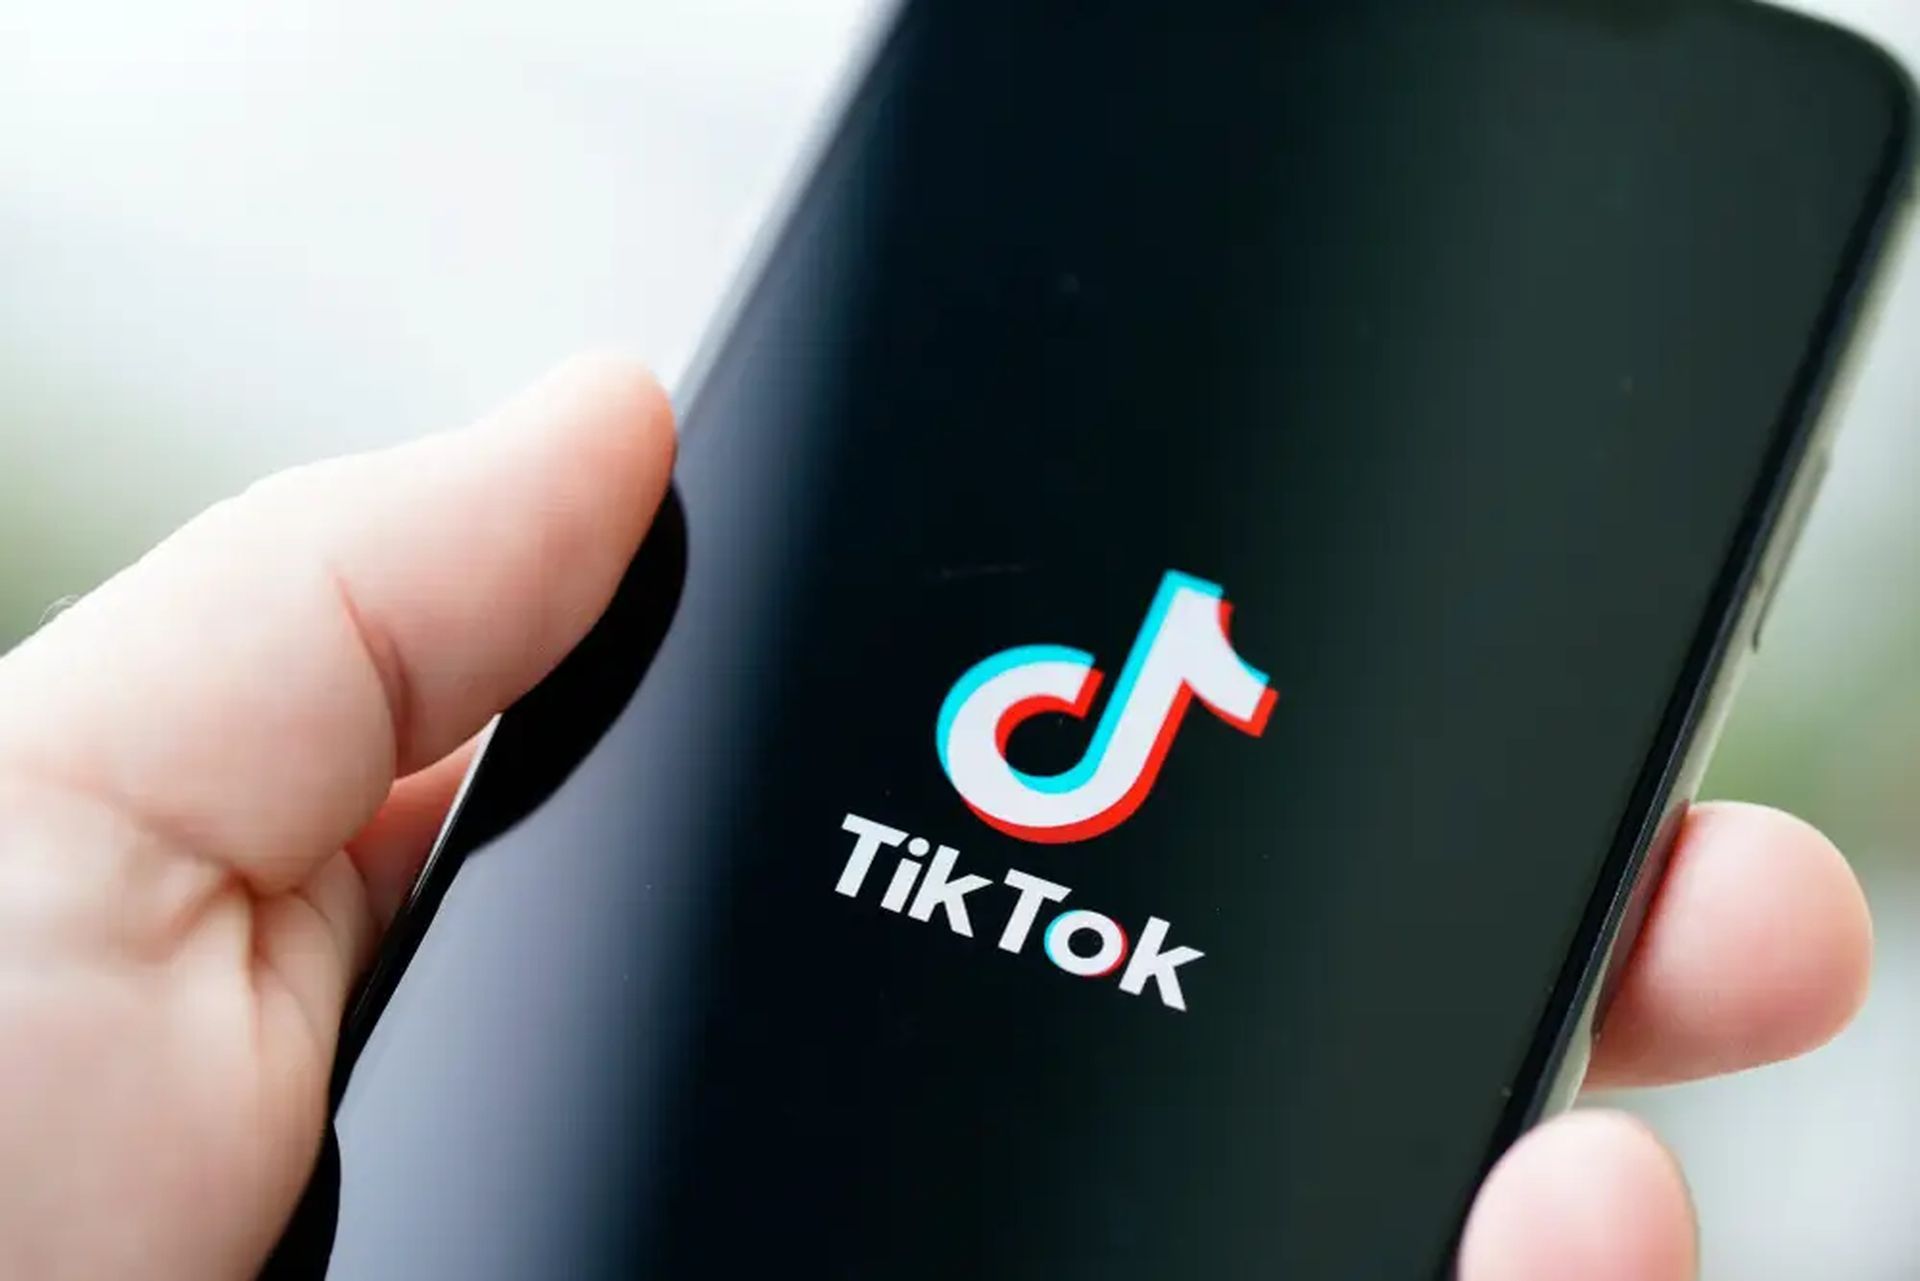 What is TikTok adults only content?